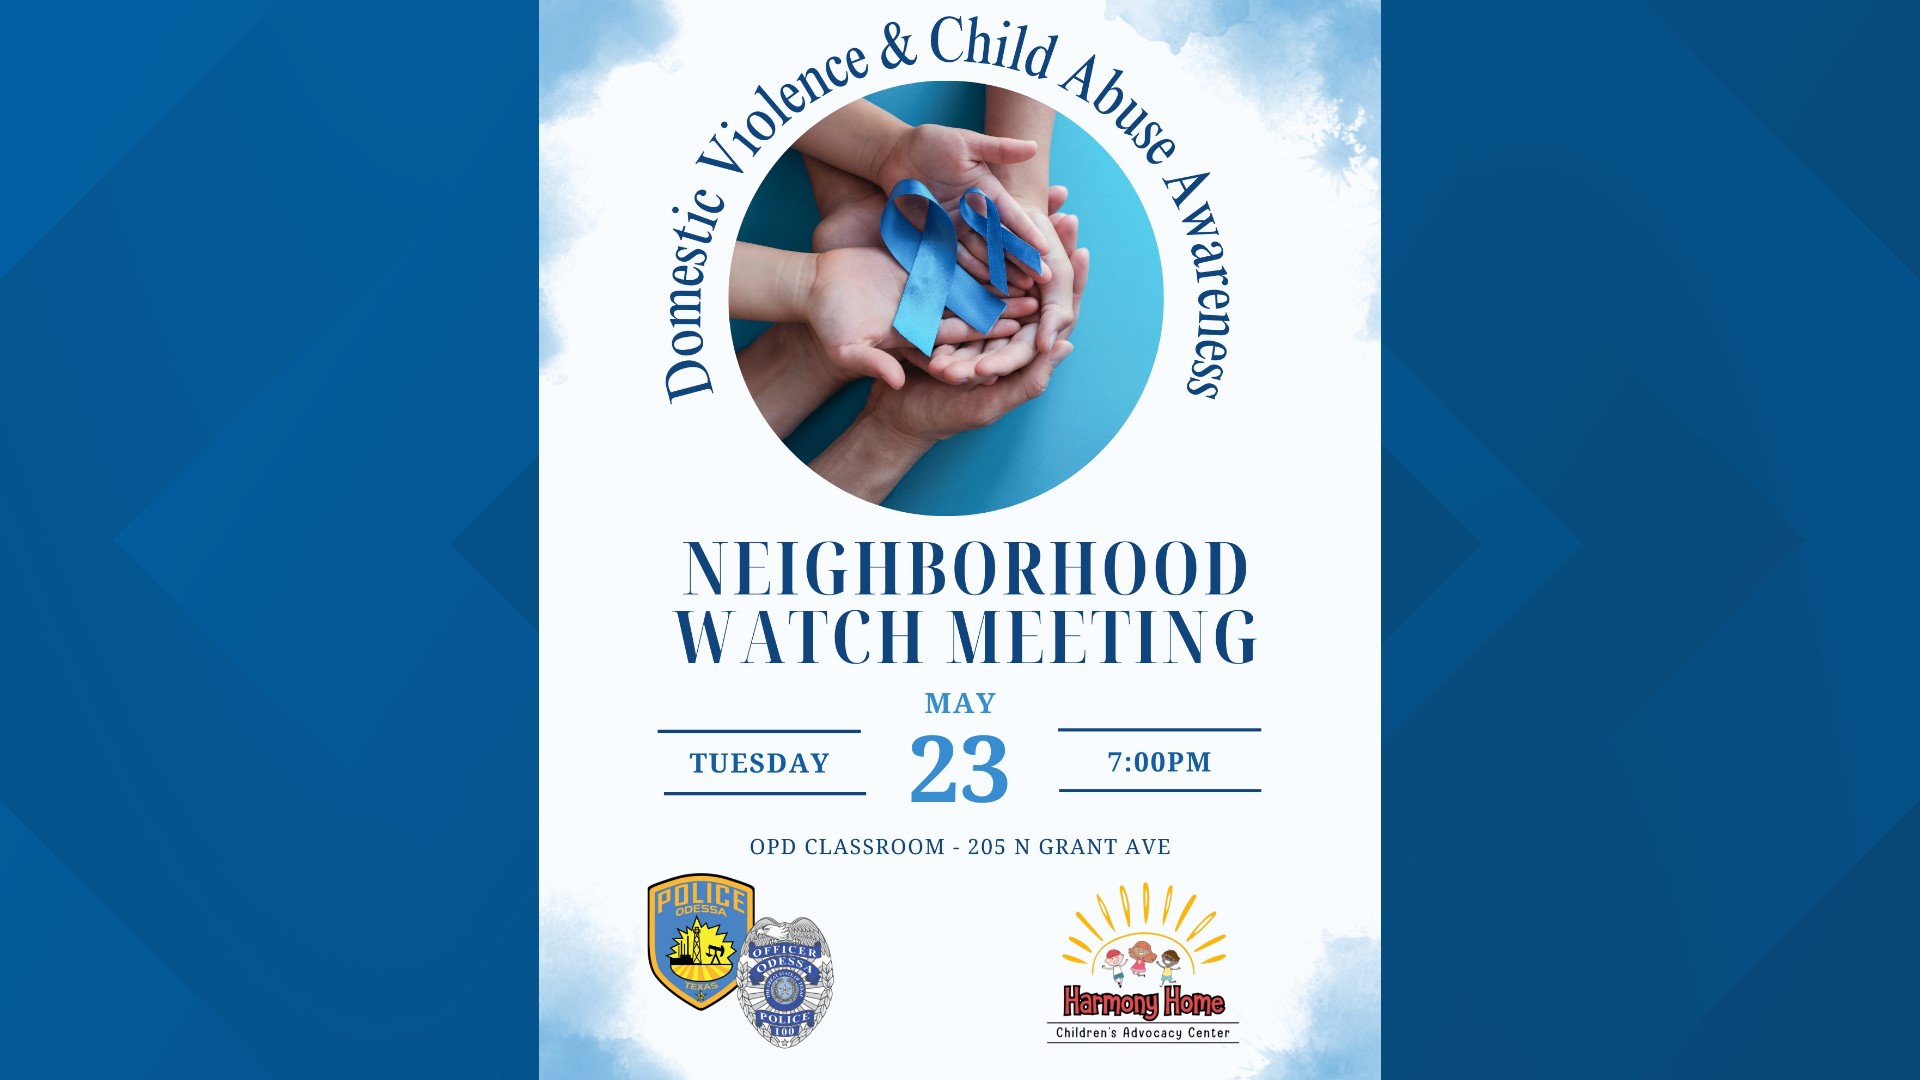 The meeting will focus on Domestic Violence and Child Abuse Awareness with OPD and Harmony Home addressing both topics.